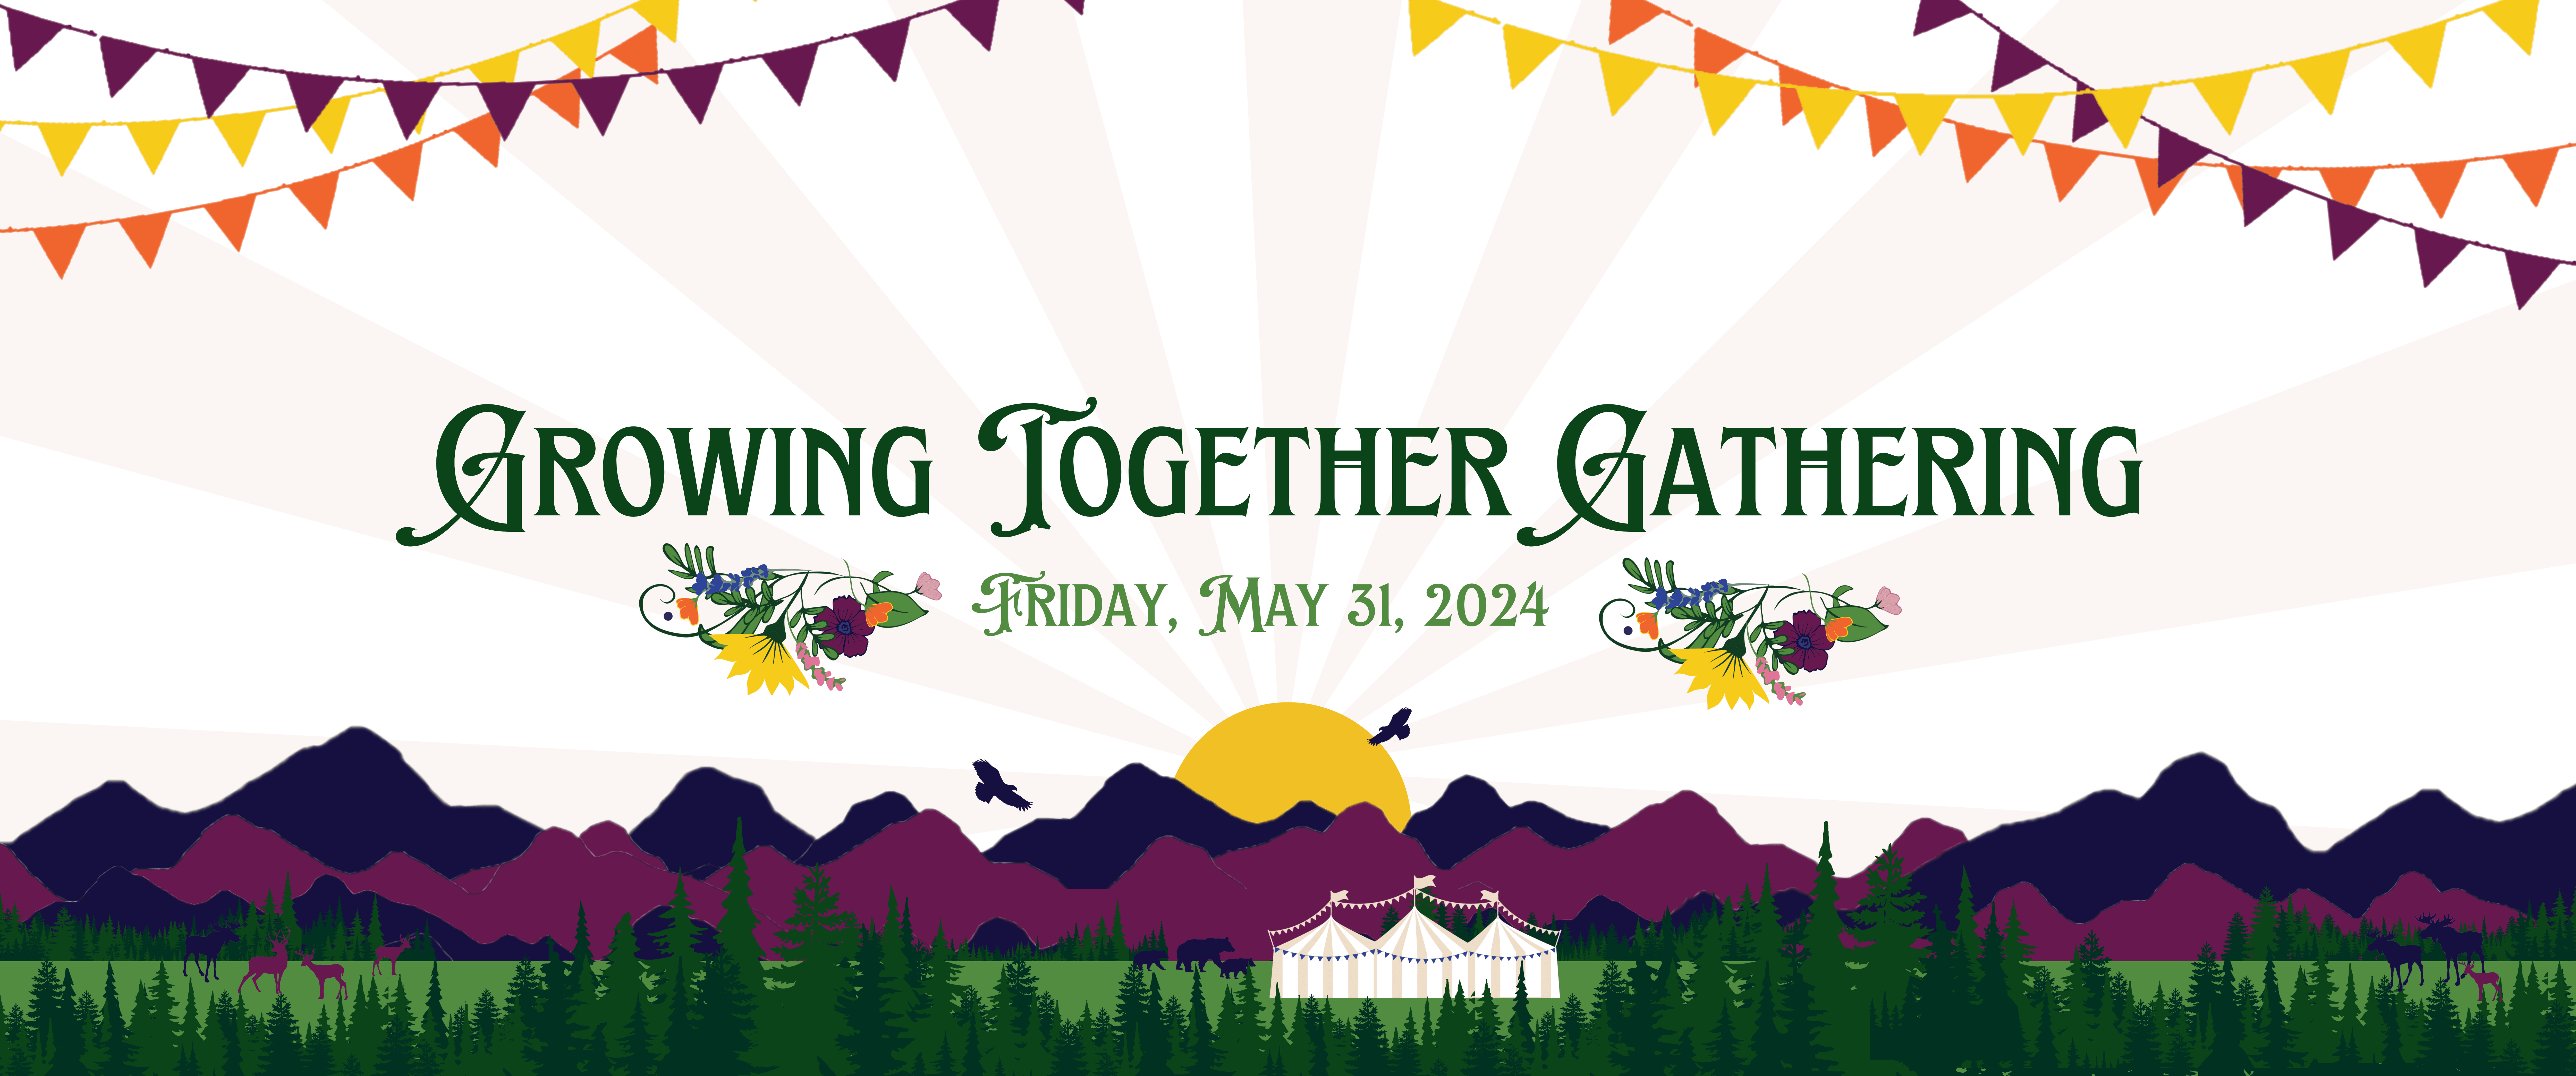 CCGC's Growing Together Gathering